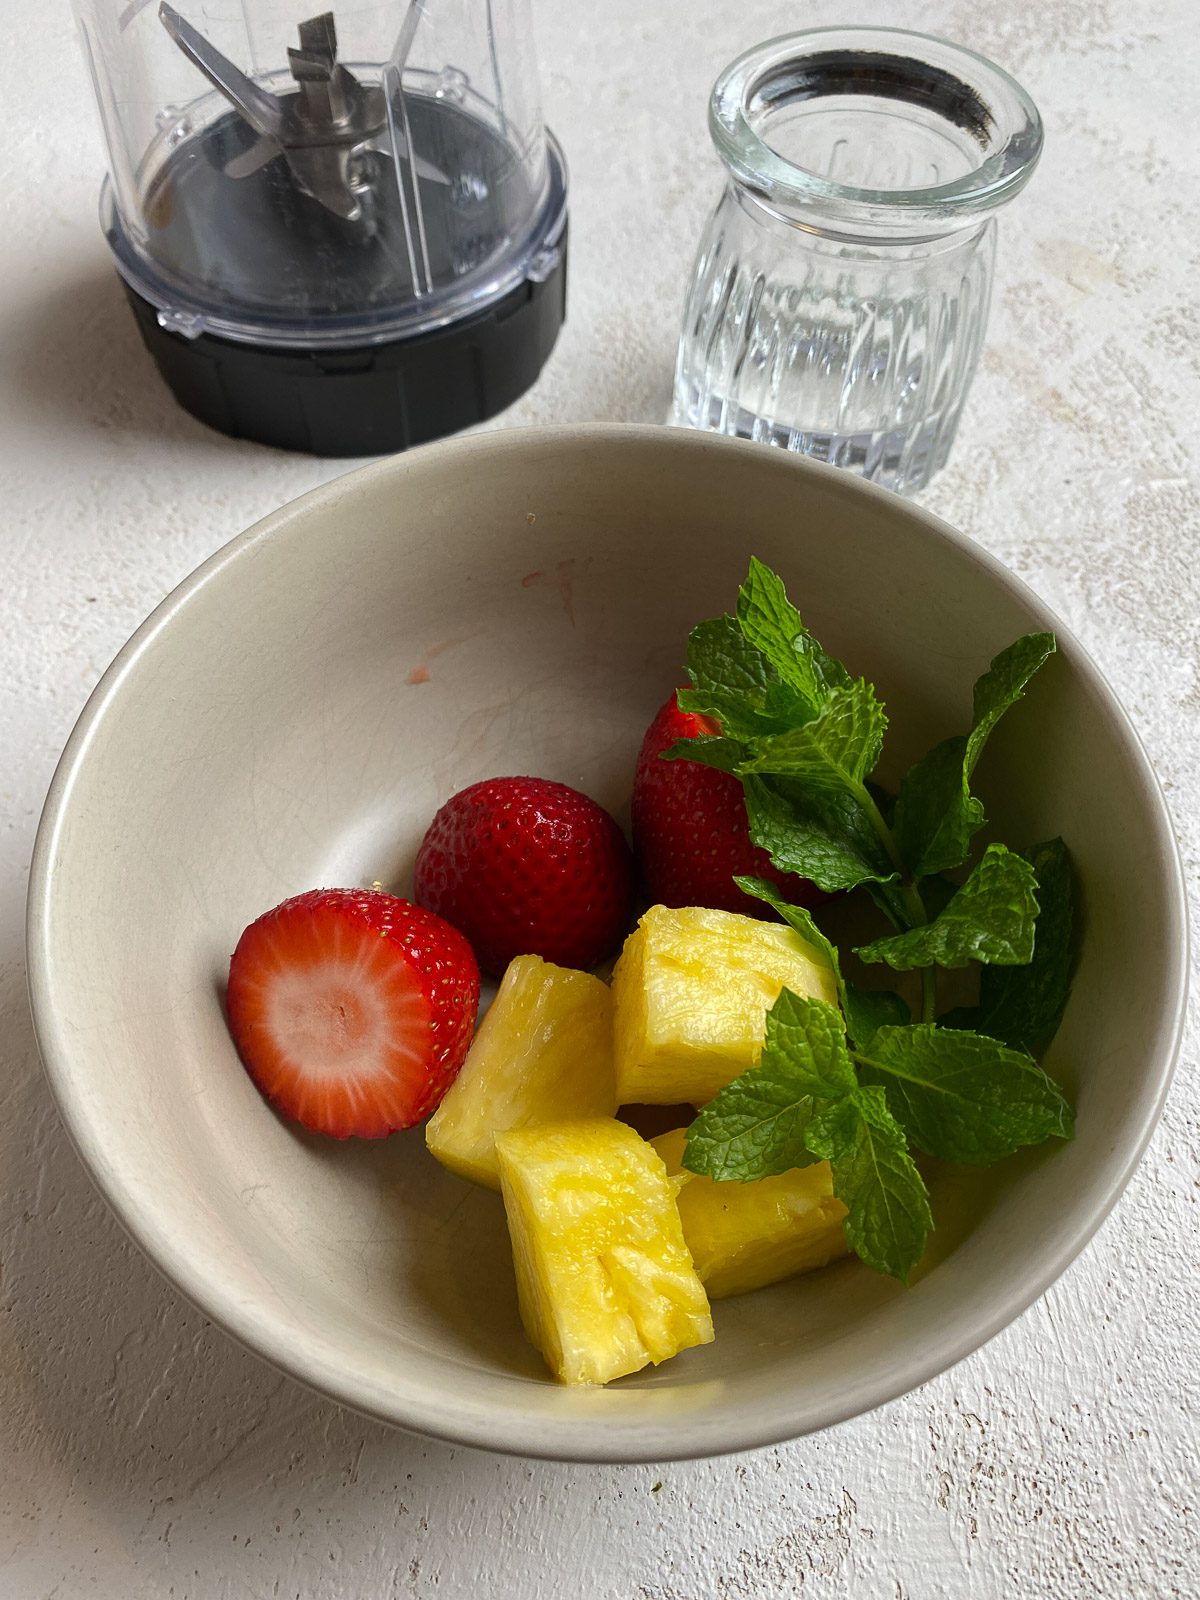 ingredients for Strawberry Pineapple Mocktail in a bowl on a white surface